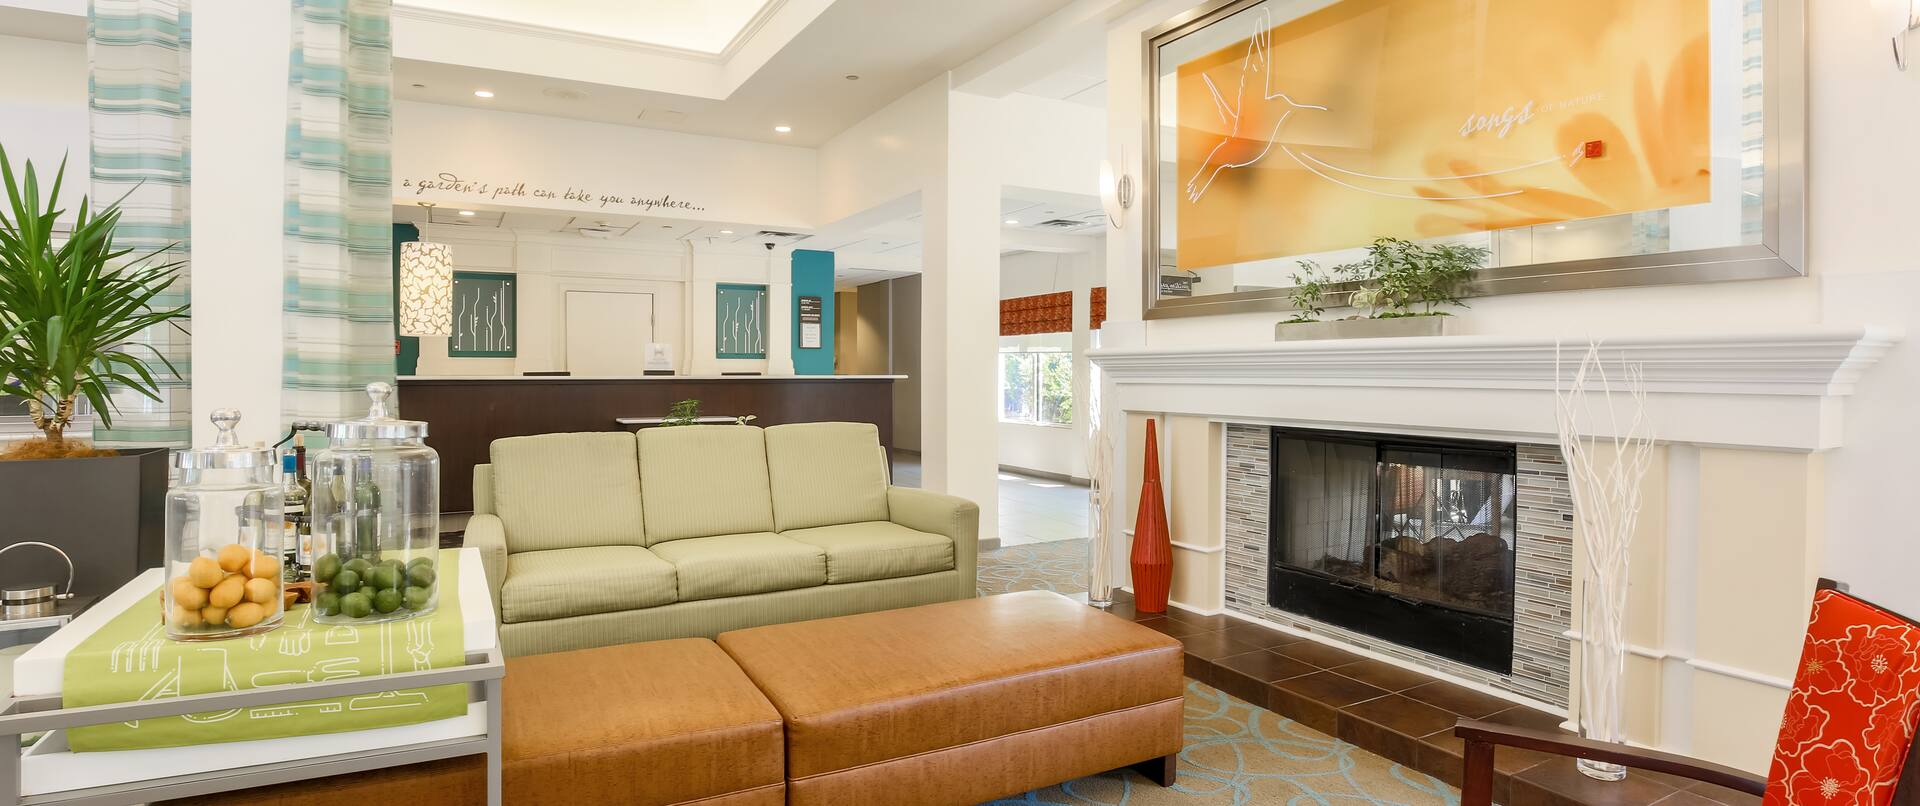 Lobby Lounge Area With Art Above Fireplace, Soft Seating, Beverage Station and View of Front Desk in Background